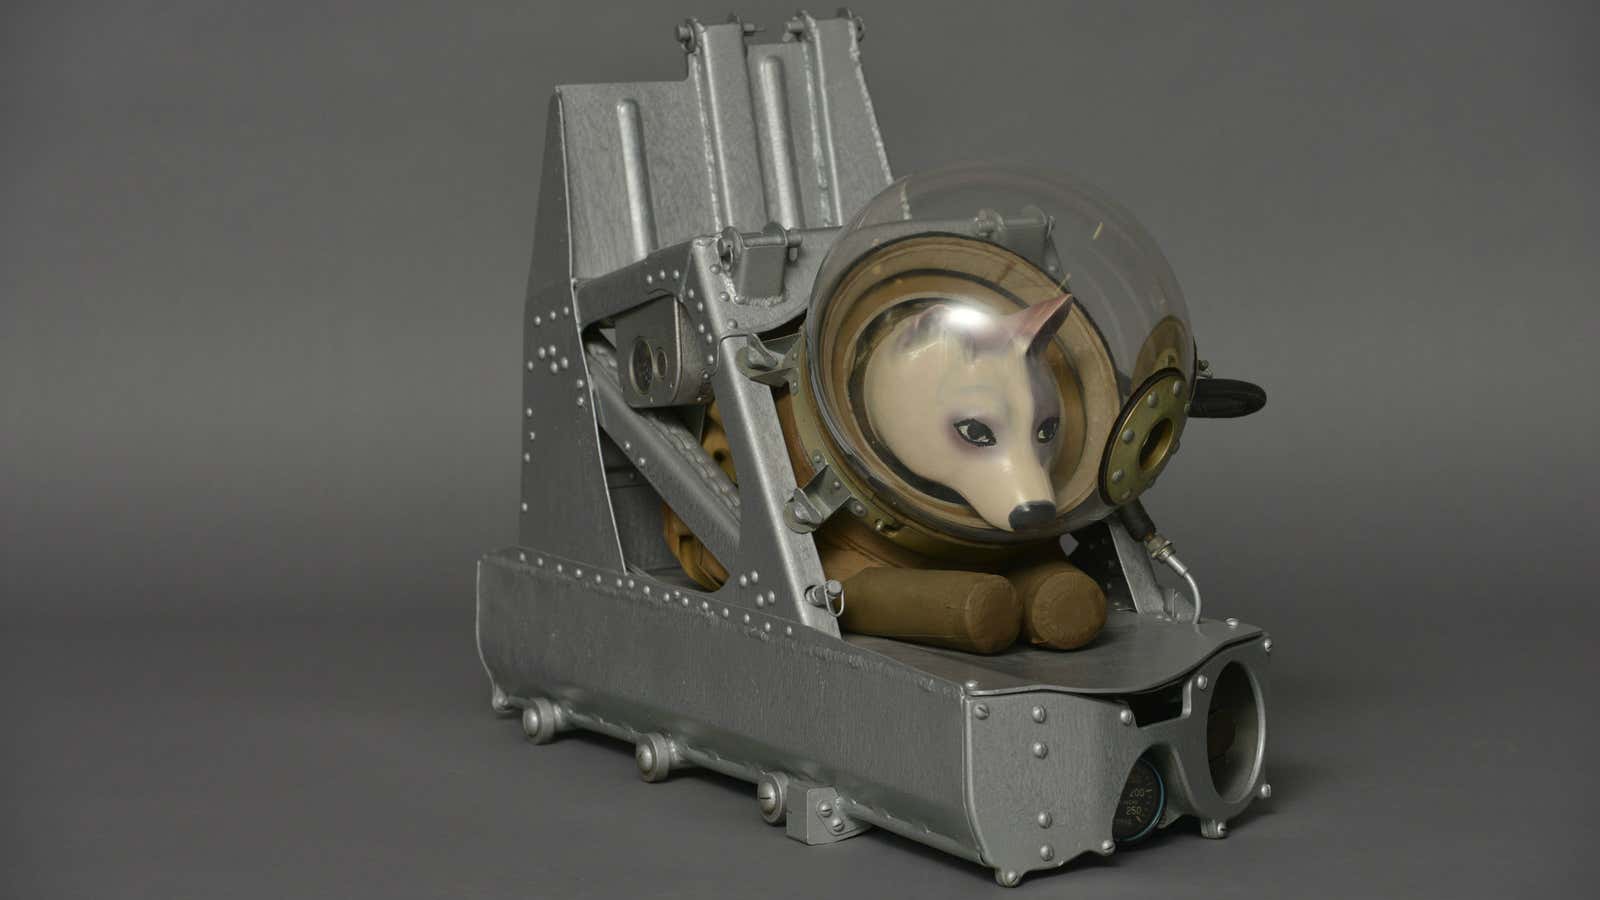 Dogs were launched on high altitude rocket flights during the 1950s. Each dog was ejected from the rocket during descent and fell to Earth by parachute. These trials helped in the development of life support systems for the first animal and human orbital missions that came later.